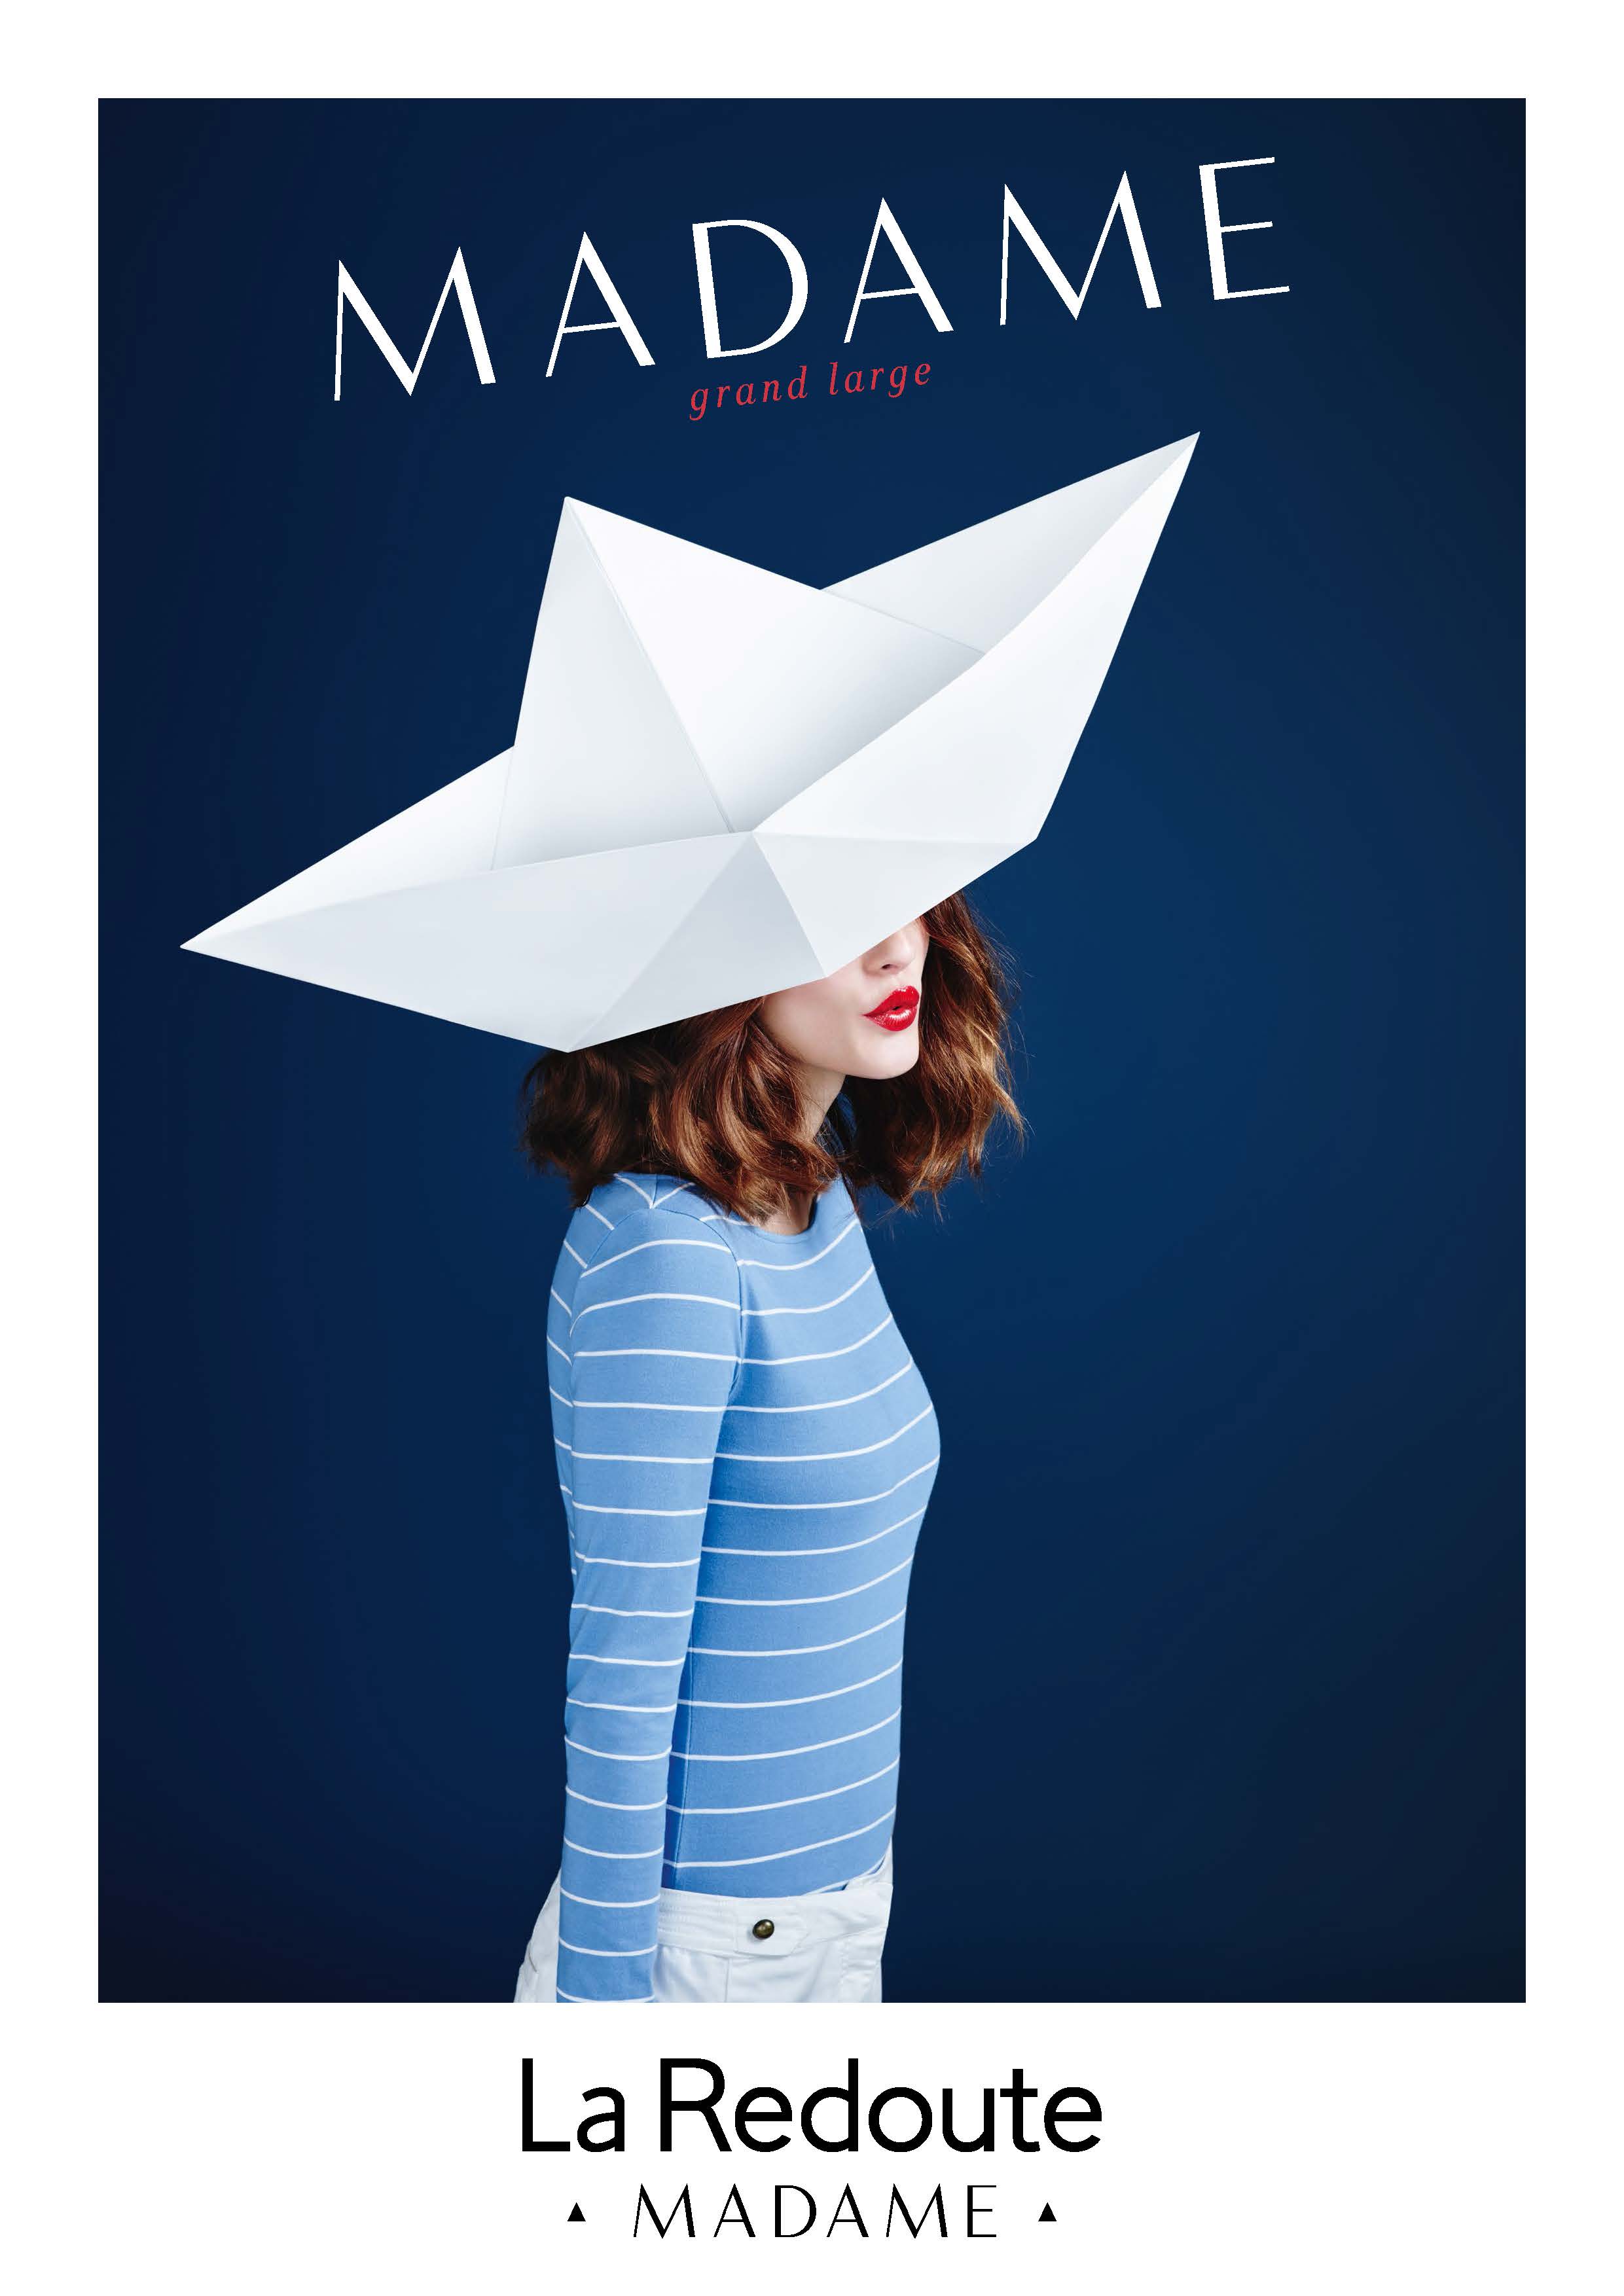 la-redoute-madame-2016-publicite-marketing-marque-mode-femme-france-agence-fred-farid-2